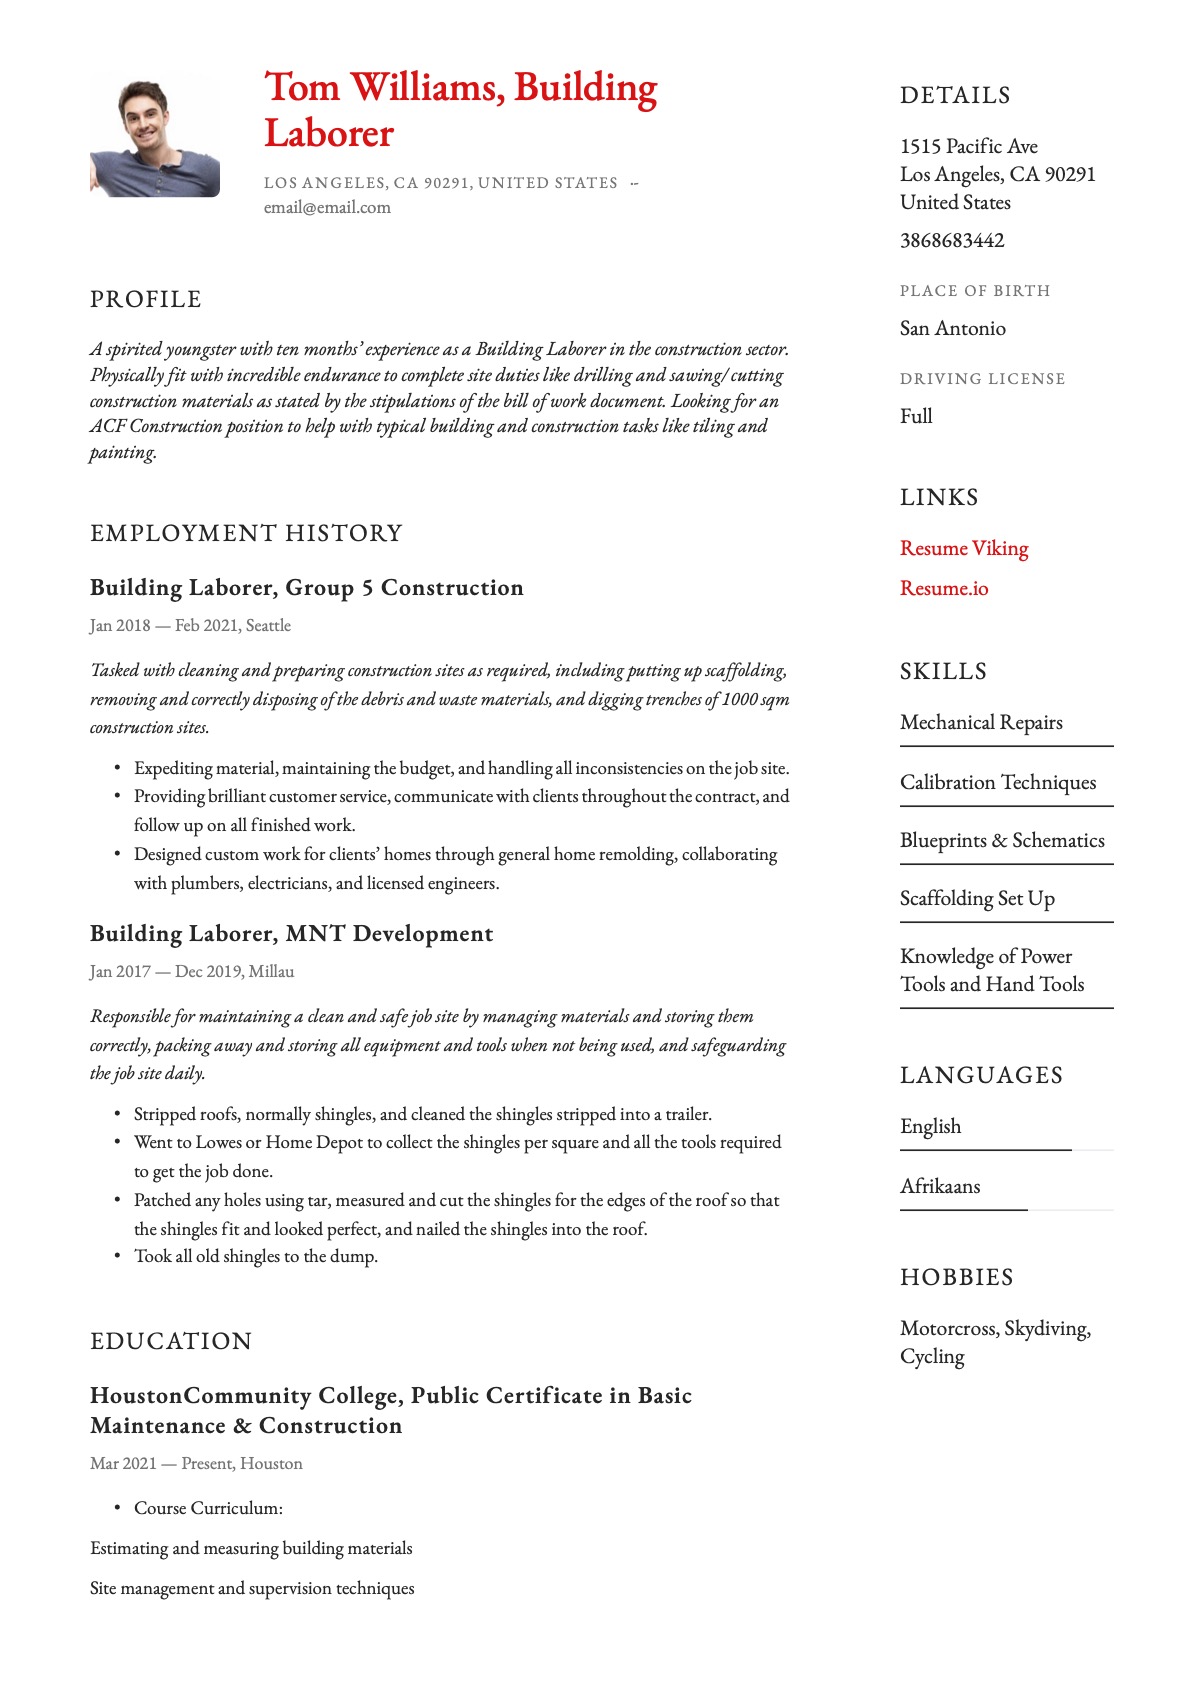 Example Resume Building Laborer-13